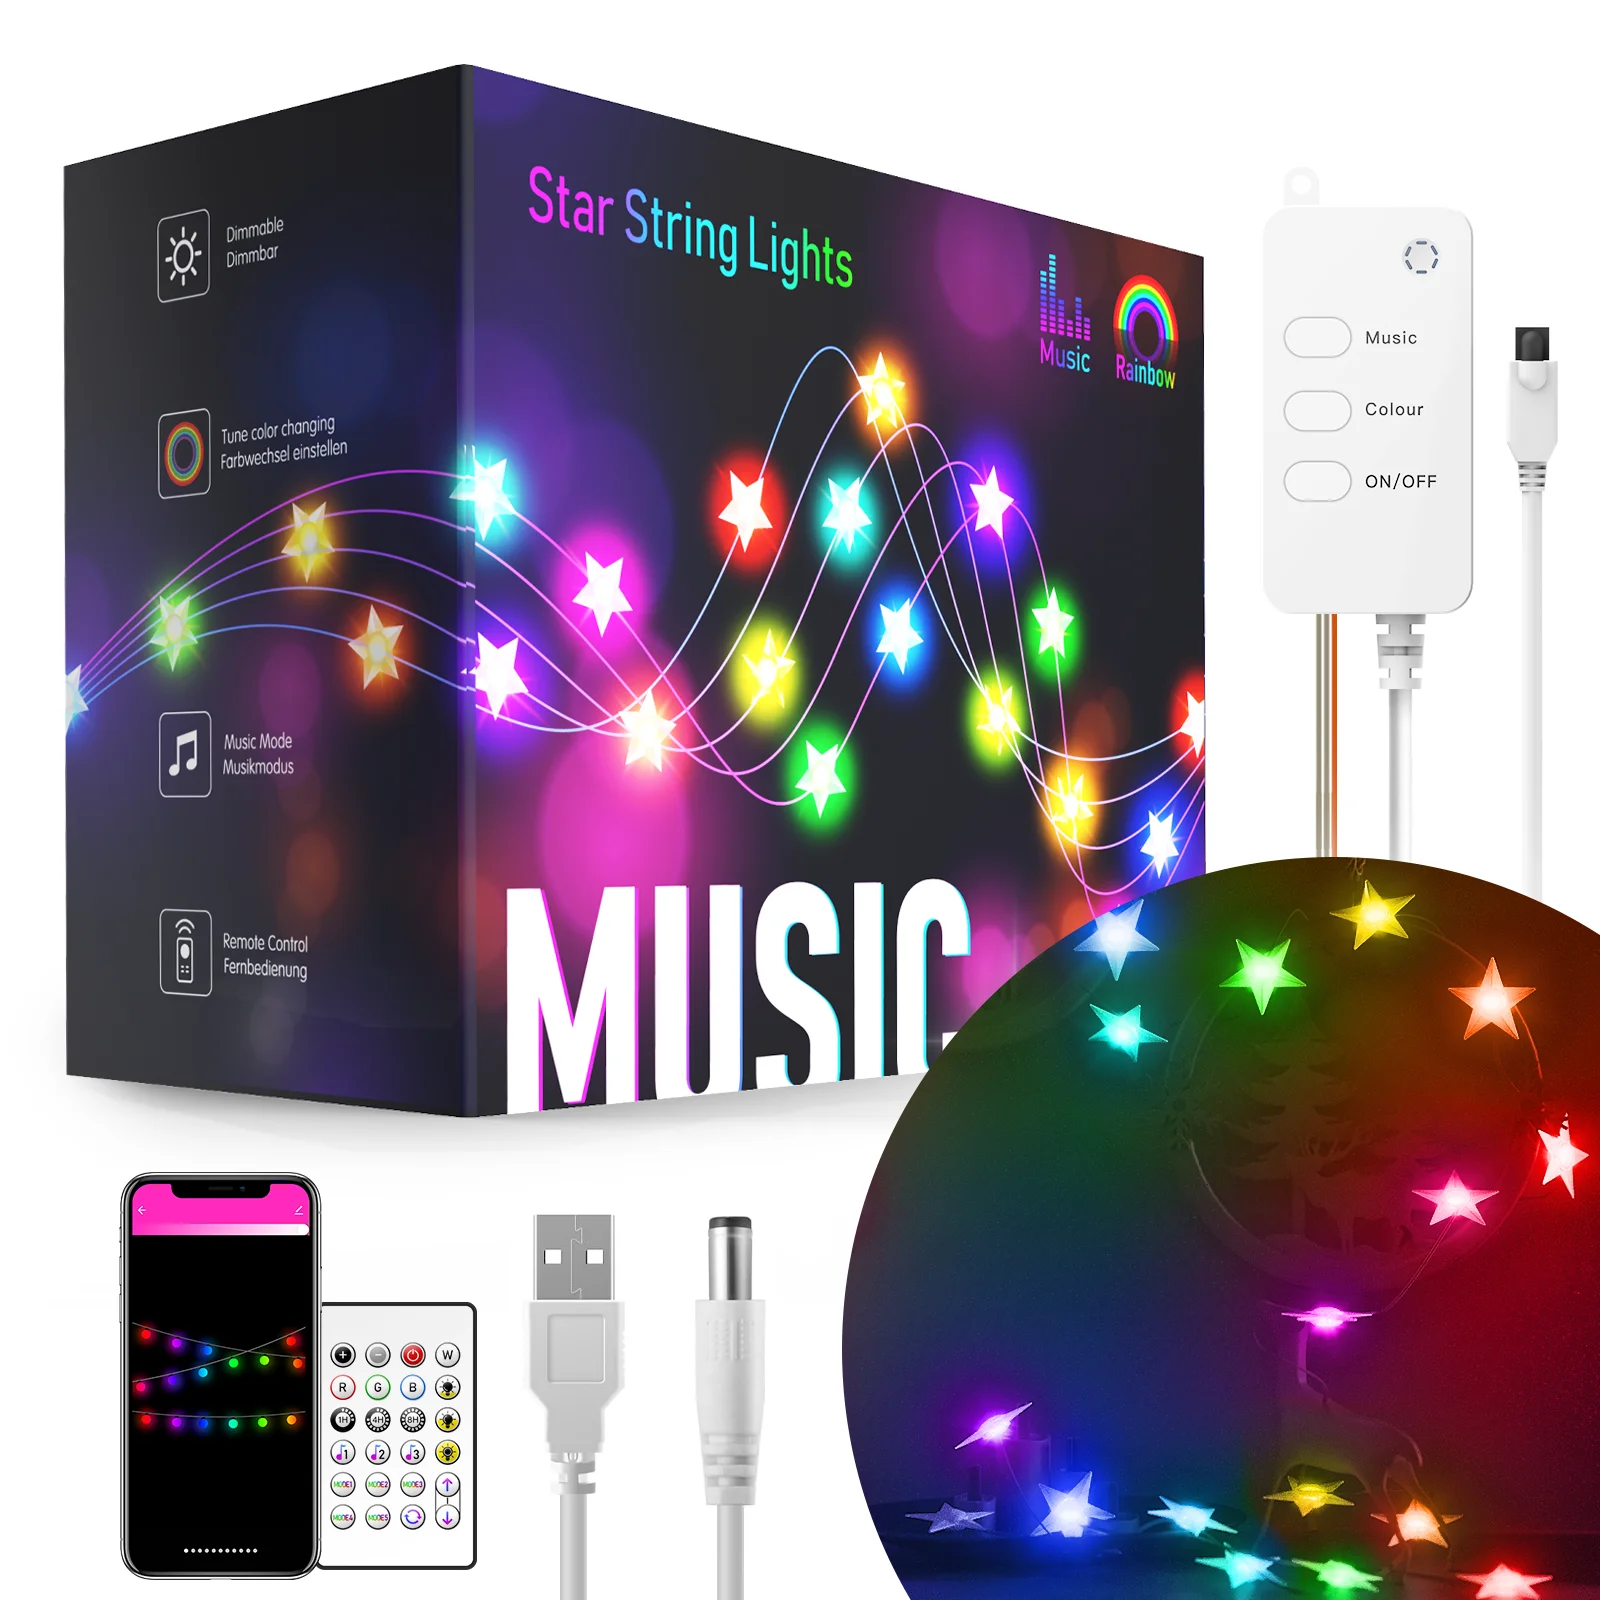 Star String Lights 16ft Color Changing Star Fairy String Lights with Preset Scenes Music Sync, APP and Remote Control Waterproof